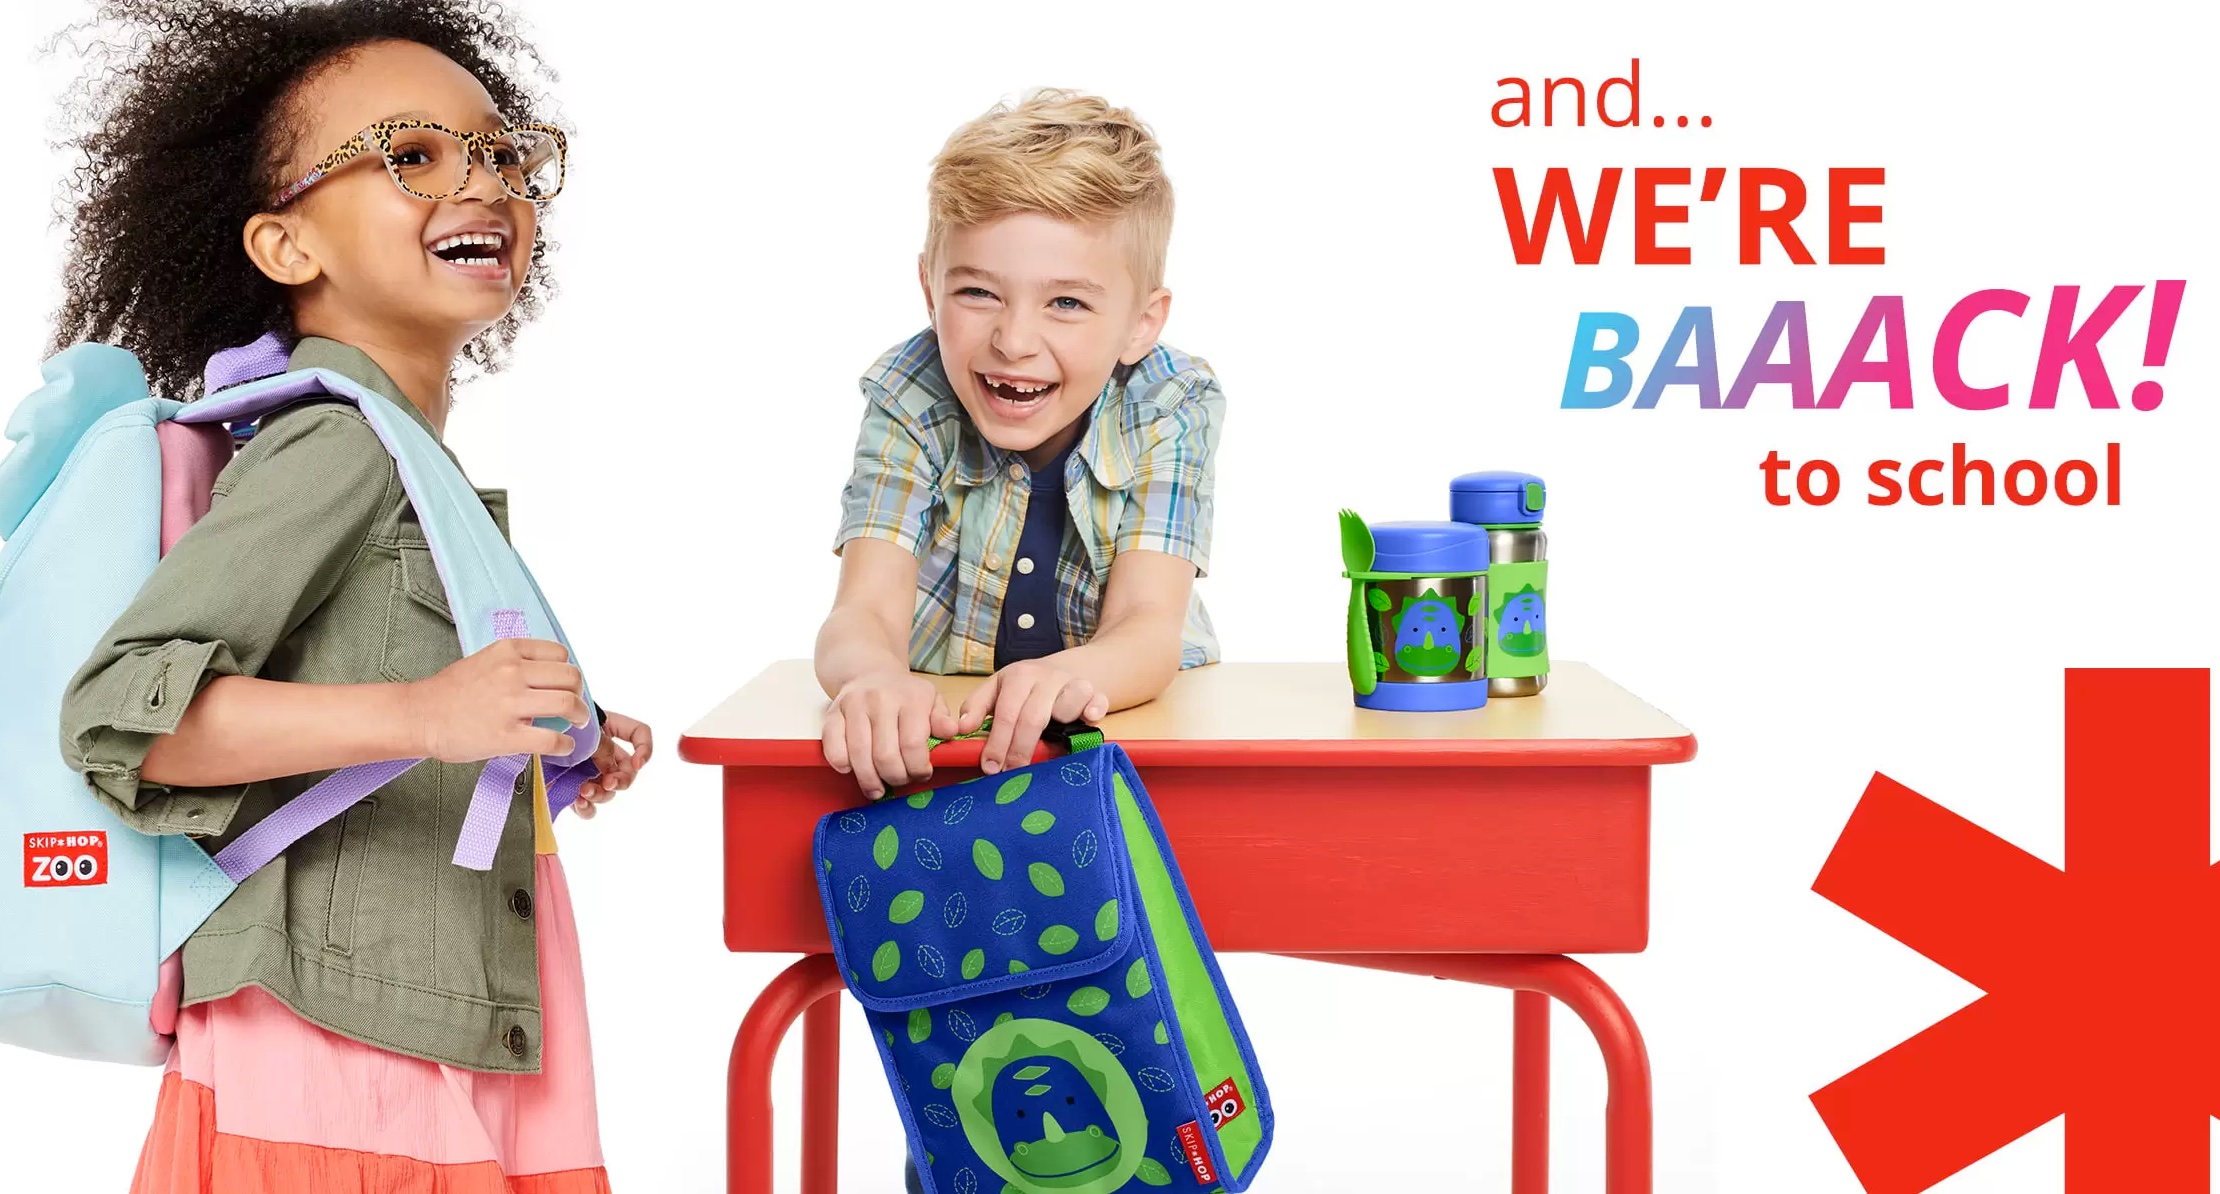 The Skip Hop back-to-school guide offers backpacks, lunch kits